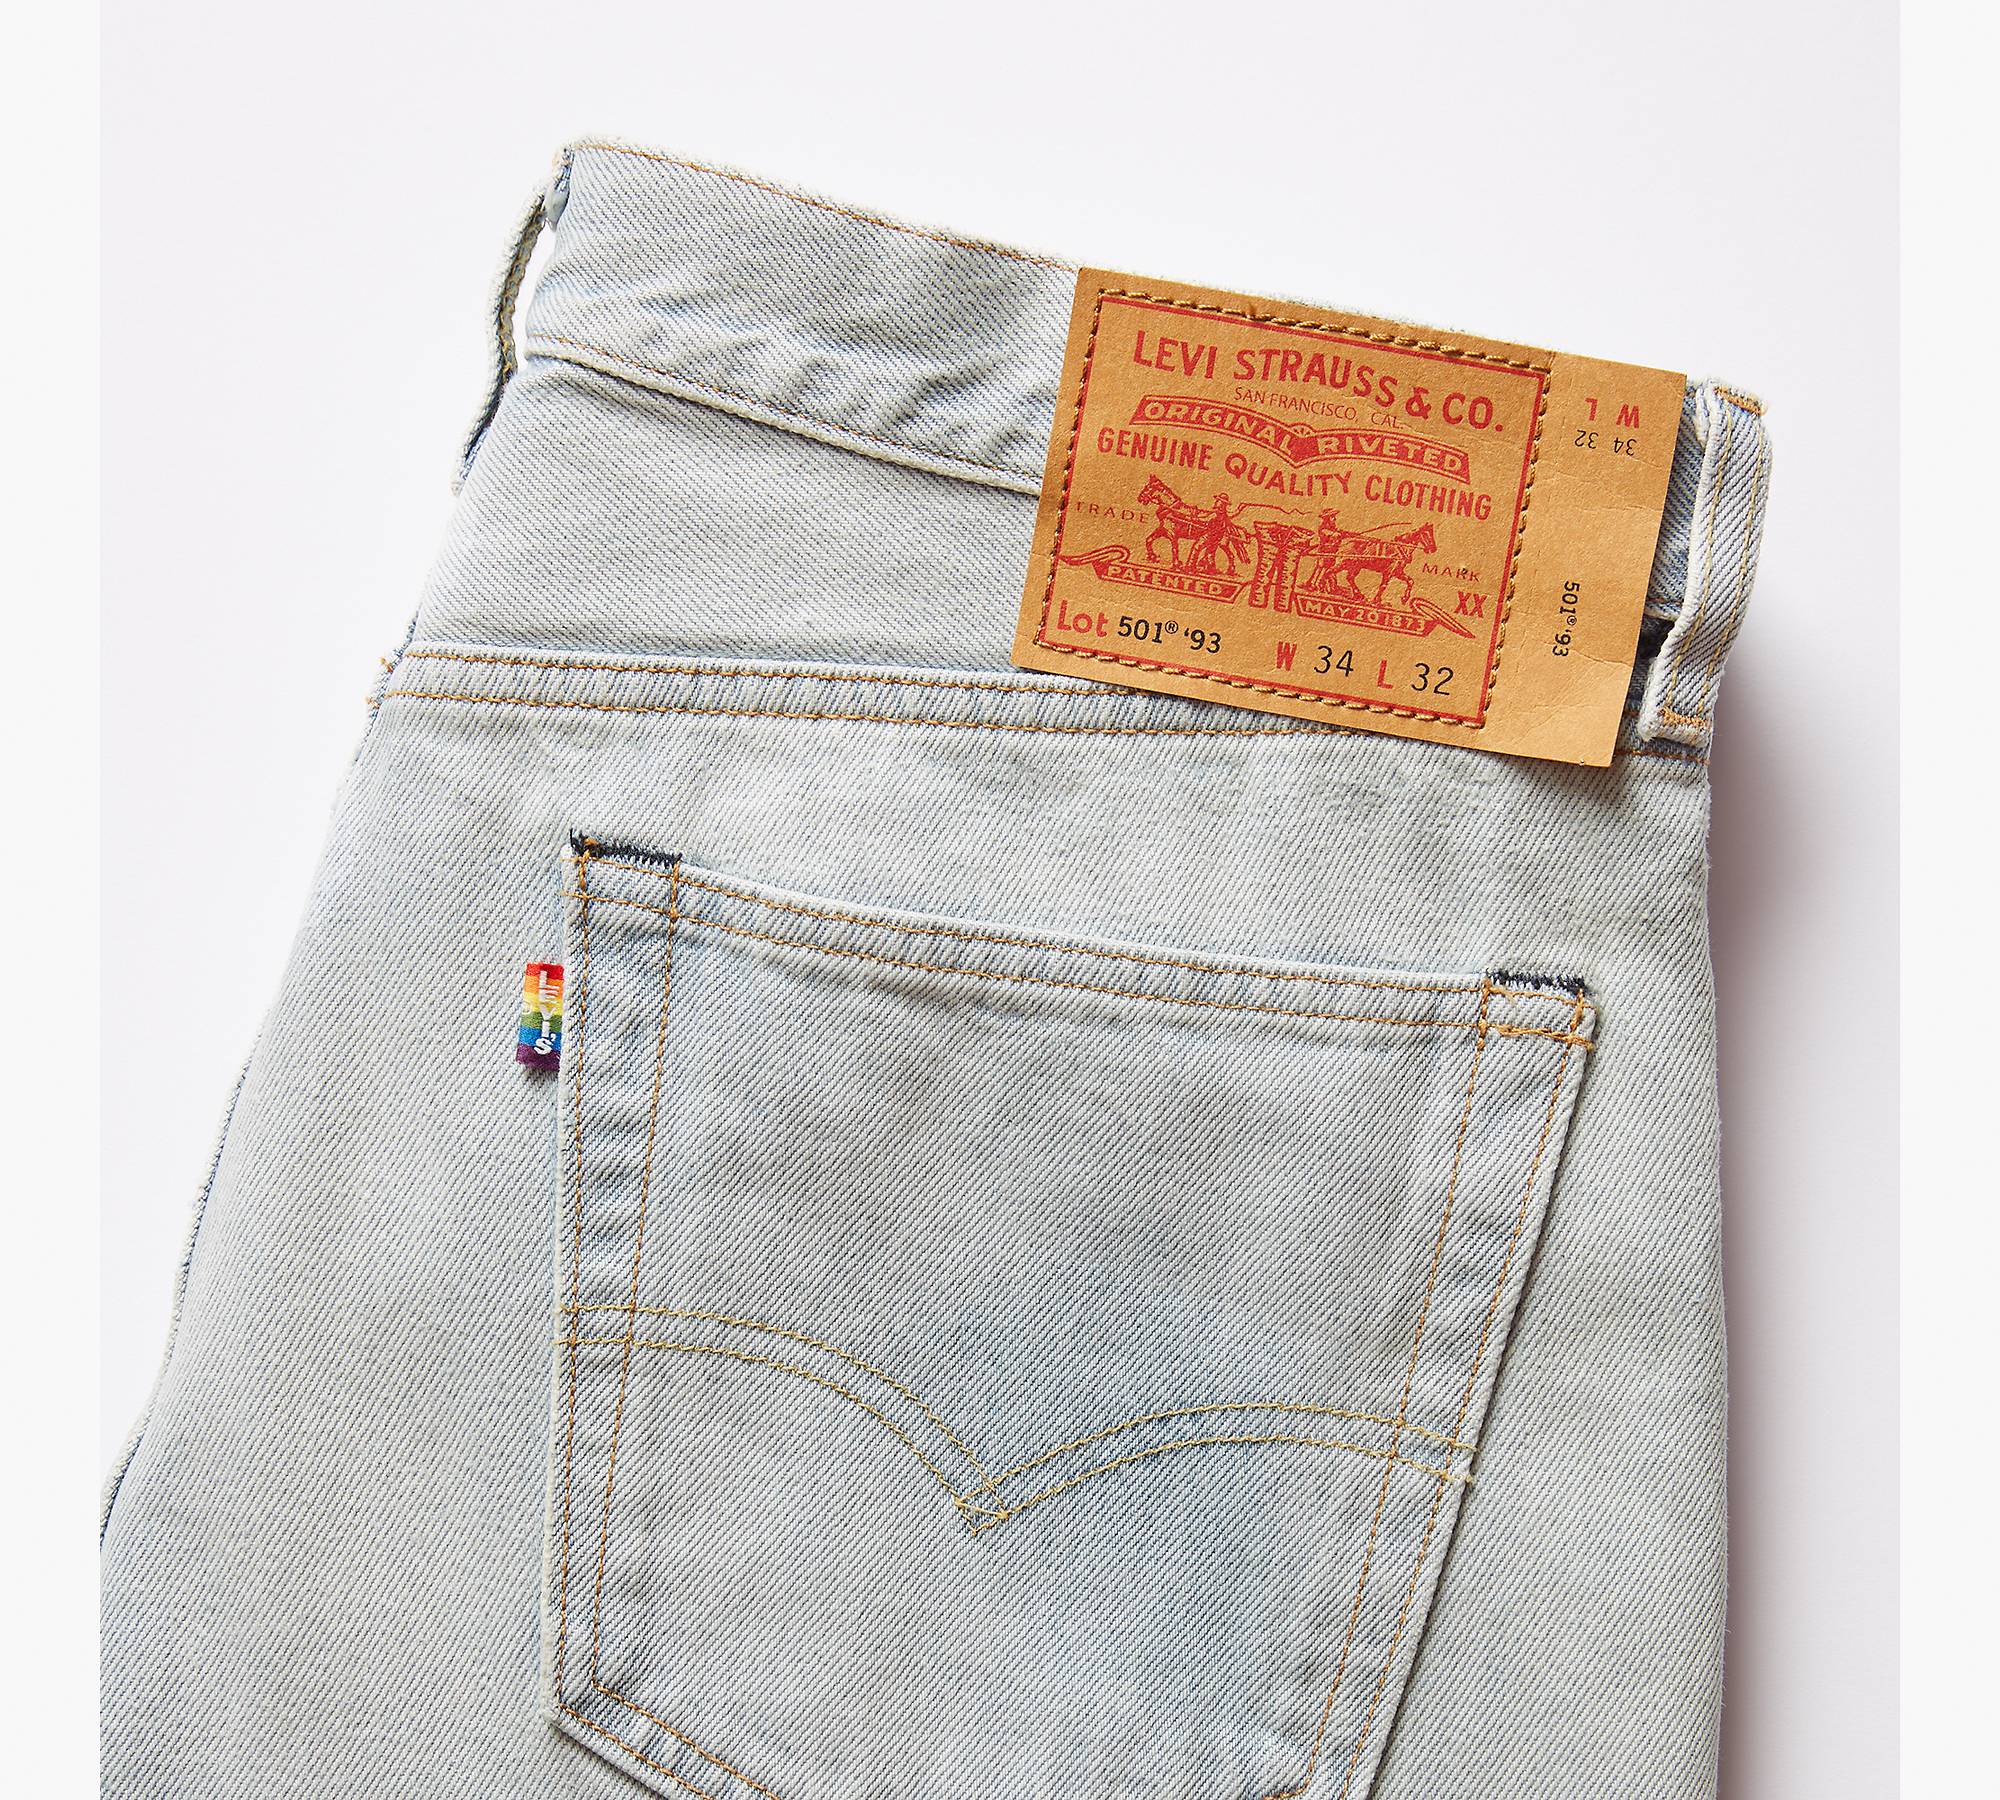 Levi's® Pride 501® '93 Straight Fit Jeans - Light Wash